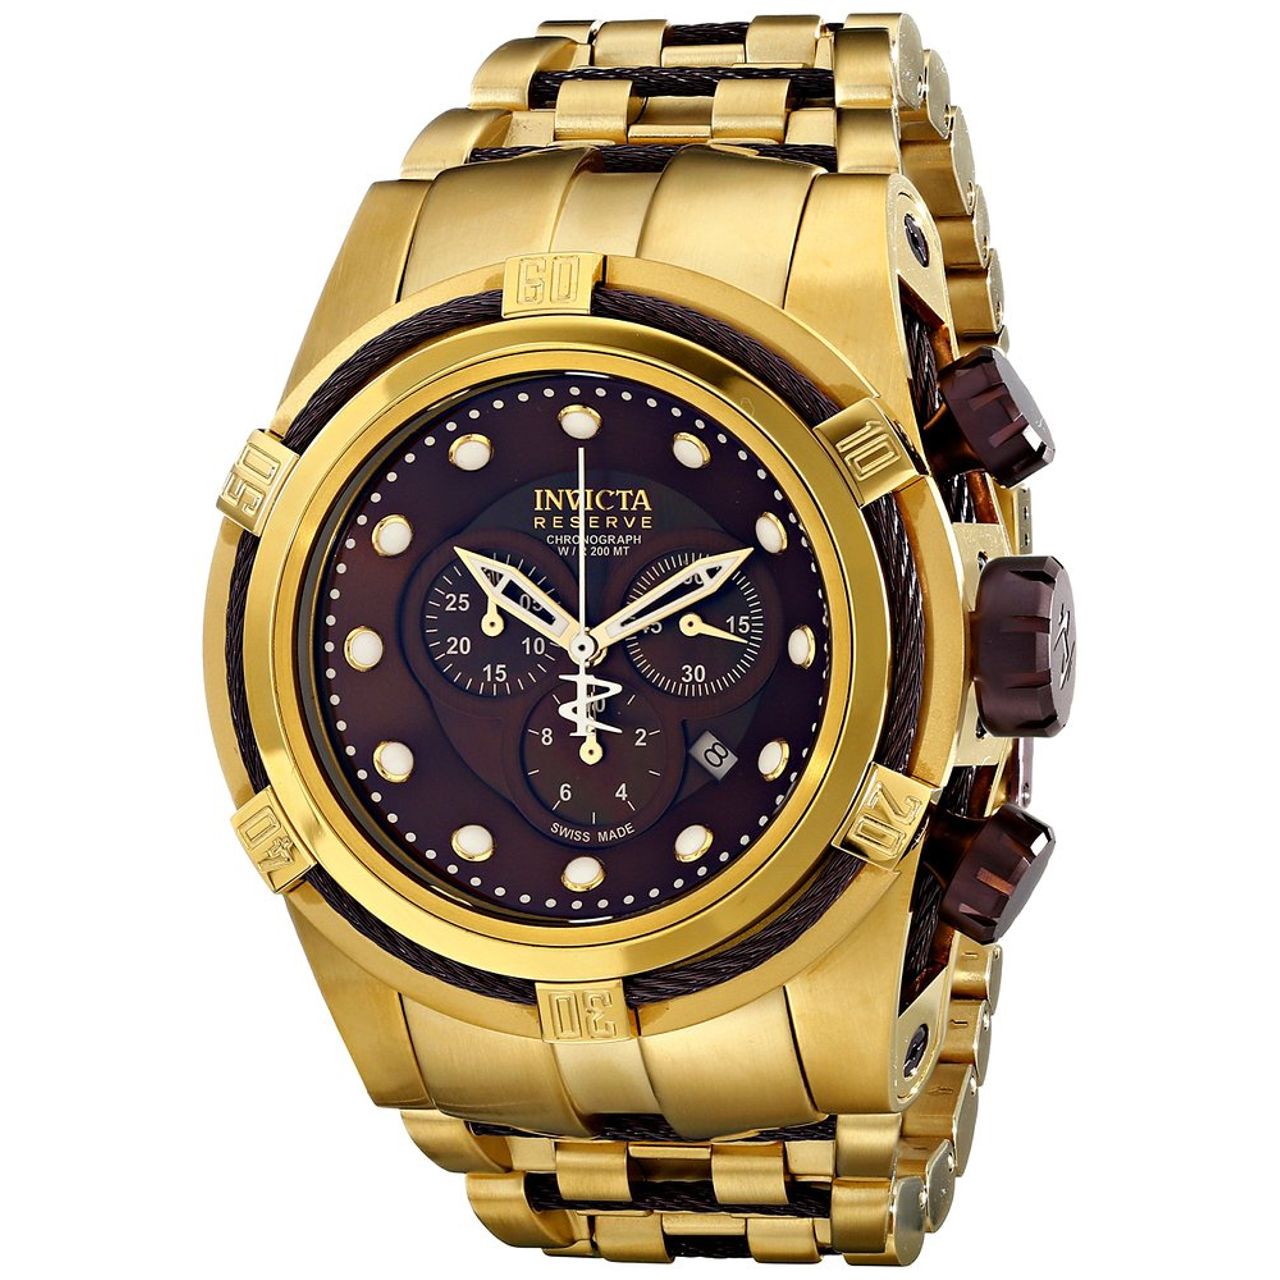 Invicta 12740 Mens Brown Dial Analog Quartz Watch with Stainless Steel Strap